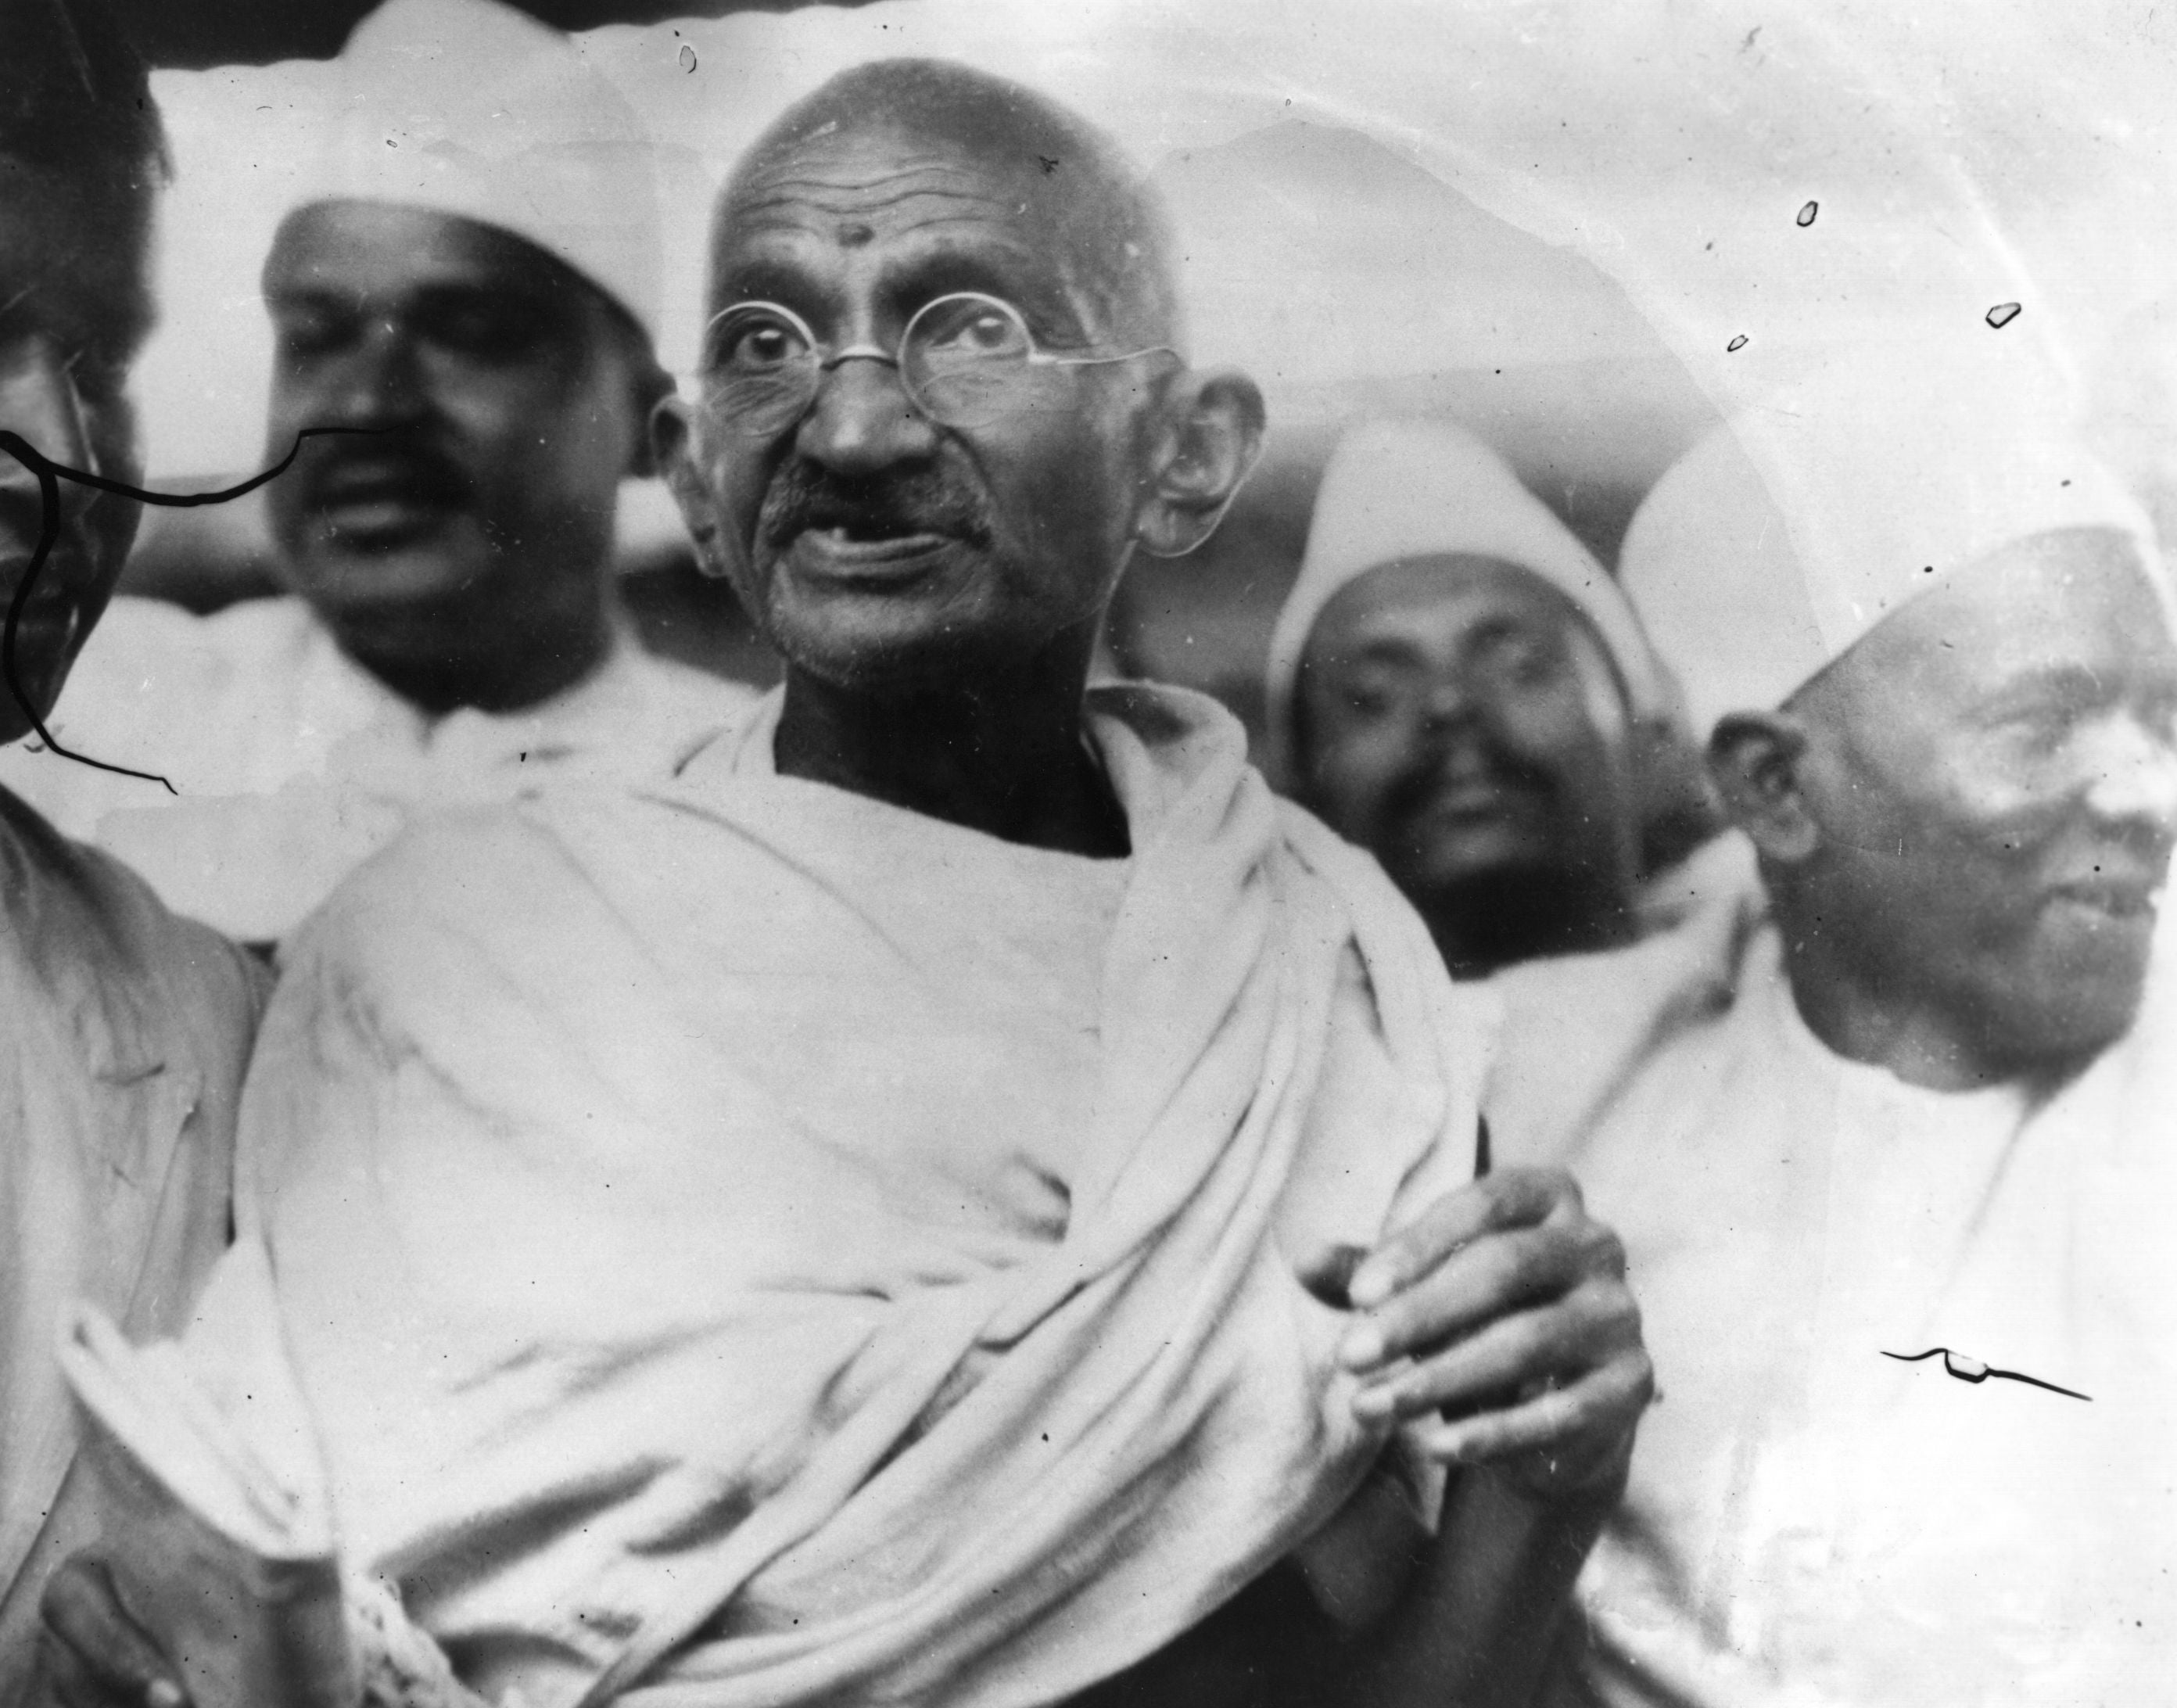 File photo of Mahatma Gandhi (Mohandas Karamchand Gandhi, 1869 - 1948), Indian nationalist and spiritual leader, leading the Salt March in protest against the government monopoly on salt production